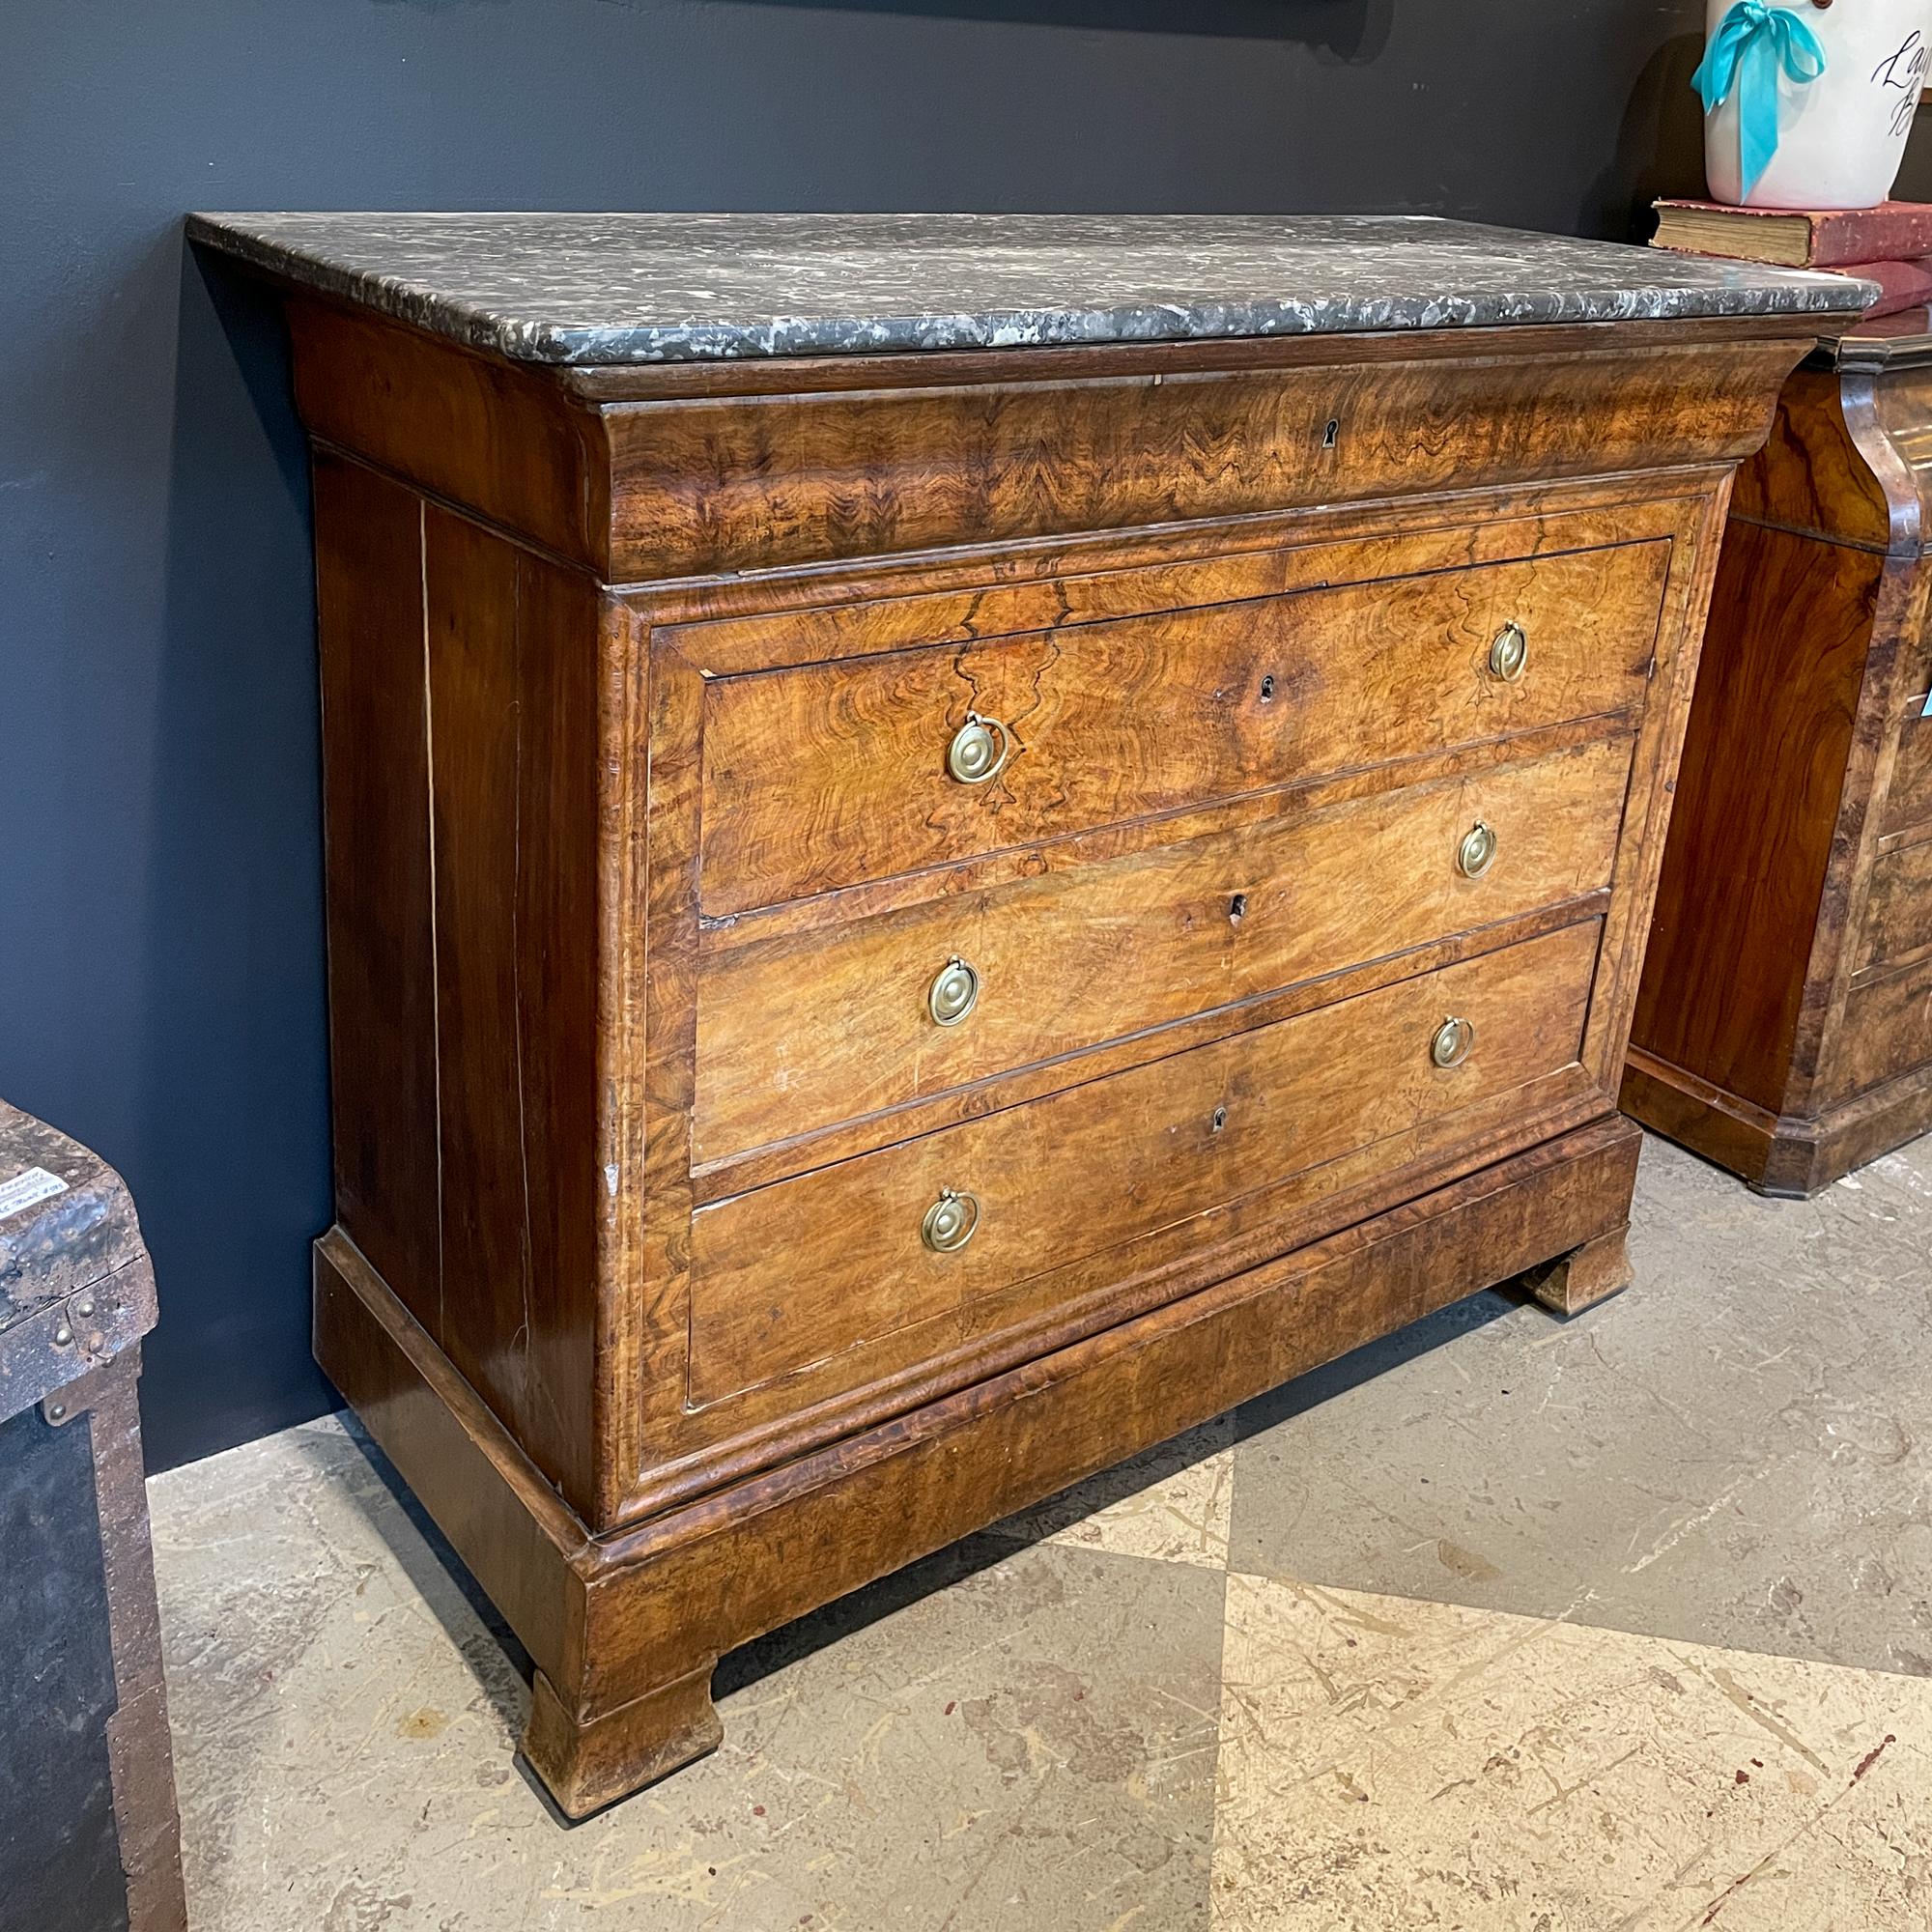 This is an antique French Louis Philippe mahogany veneer commode with five drawers and a Belgian marble top. The main body of the chest has three drawers, as well as a narrow drawer at the very bottom (between the legs) and the very top. The bottom